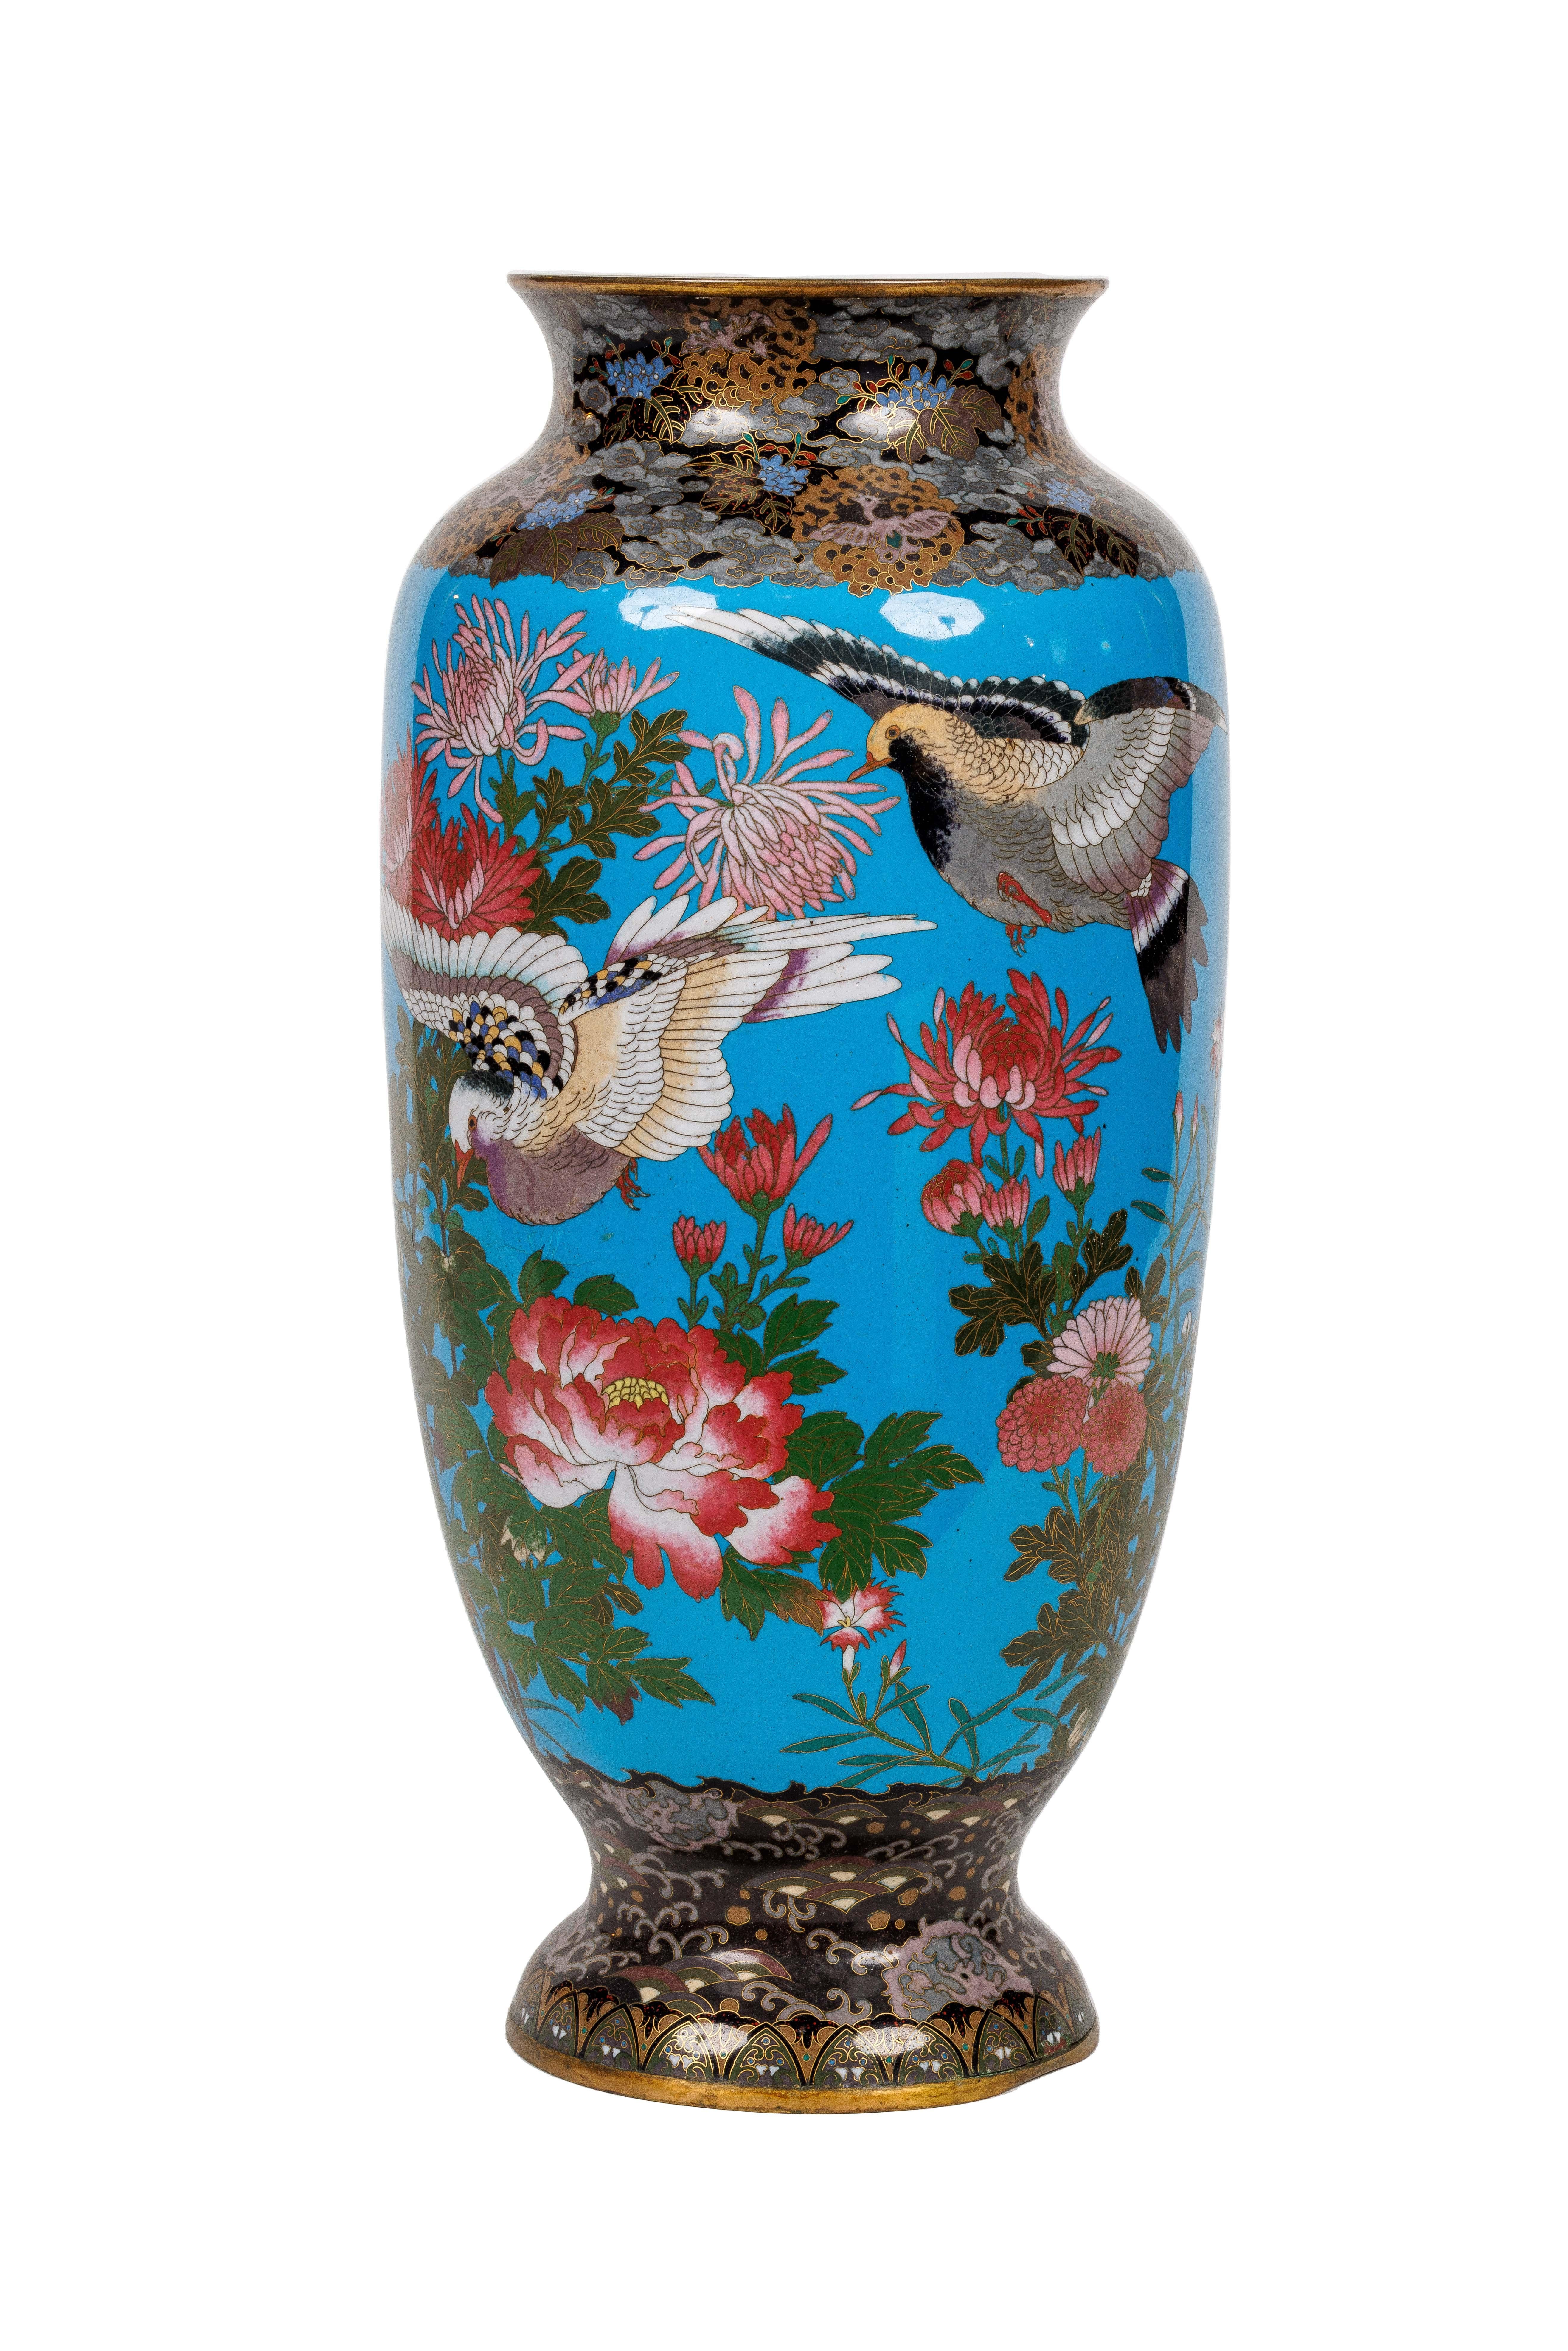 Large Pair of Meiji Period Japanese Cloisonne Enamel Vases Attributed to Goto For Sale 4